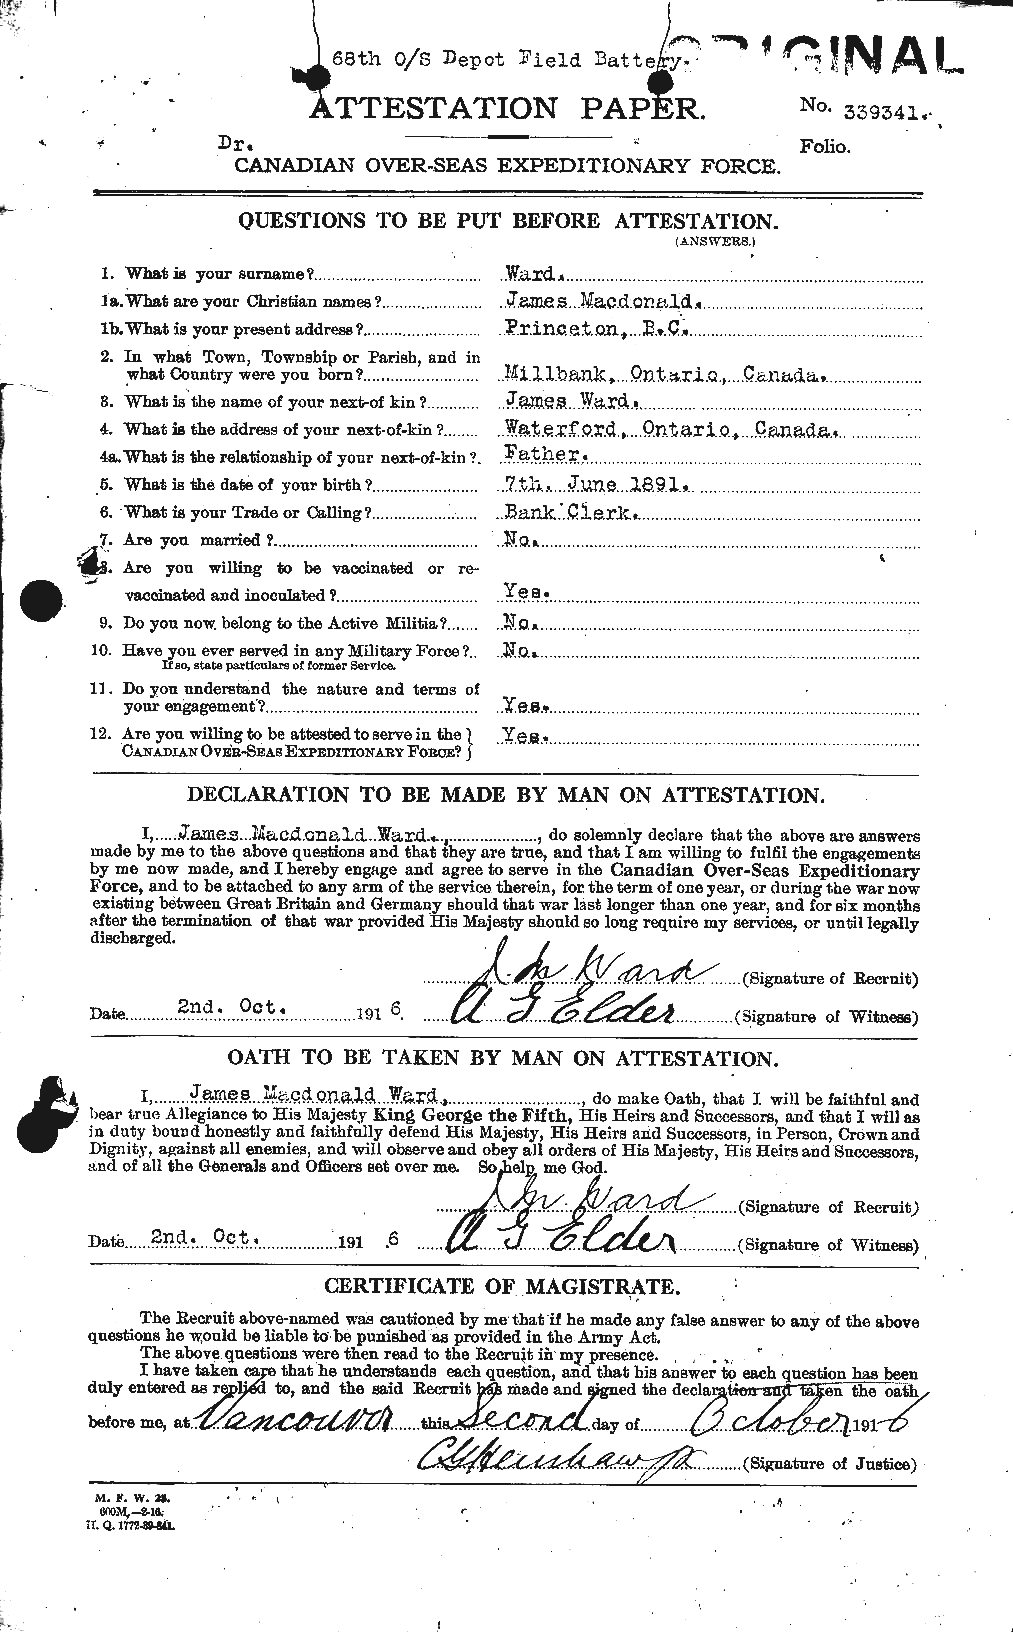 Personnel Records of the First World War - CEF 657914a